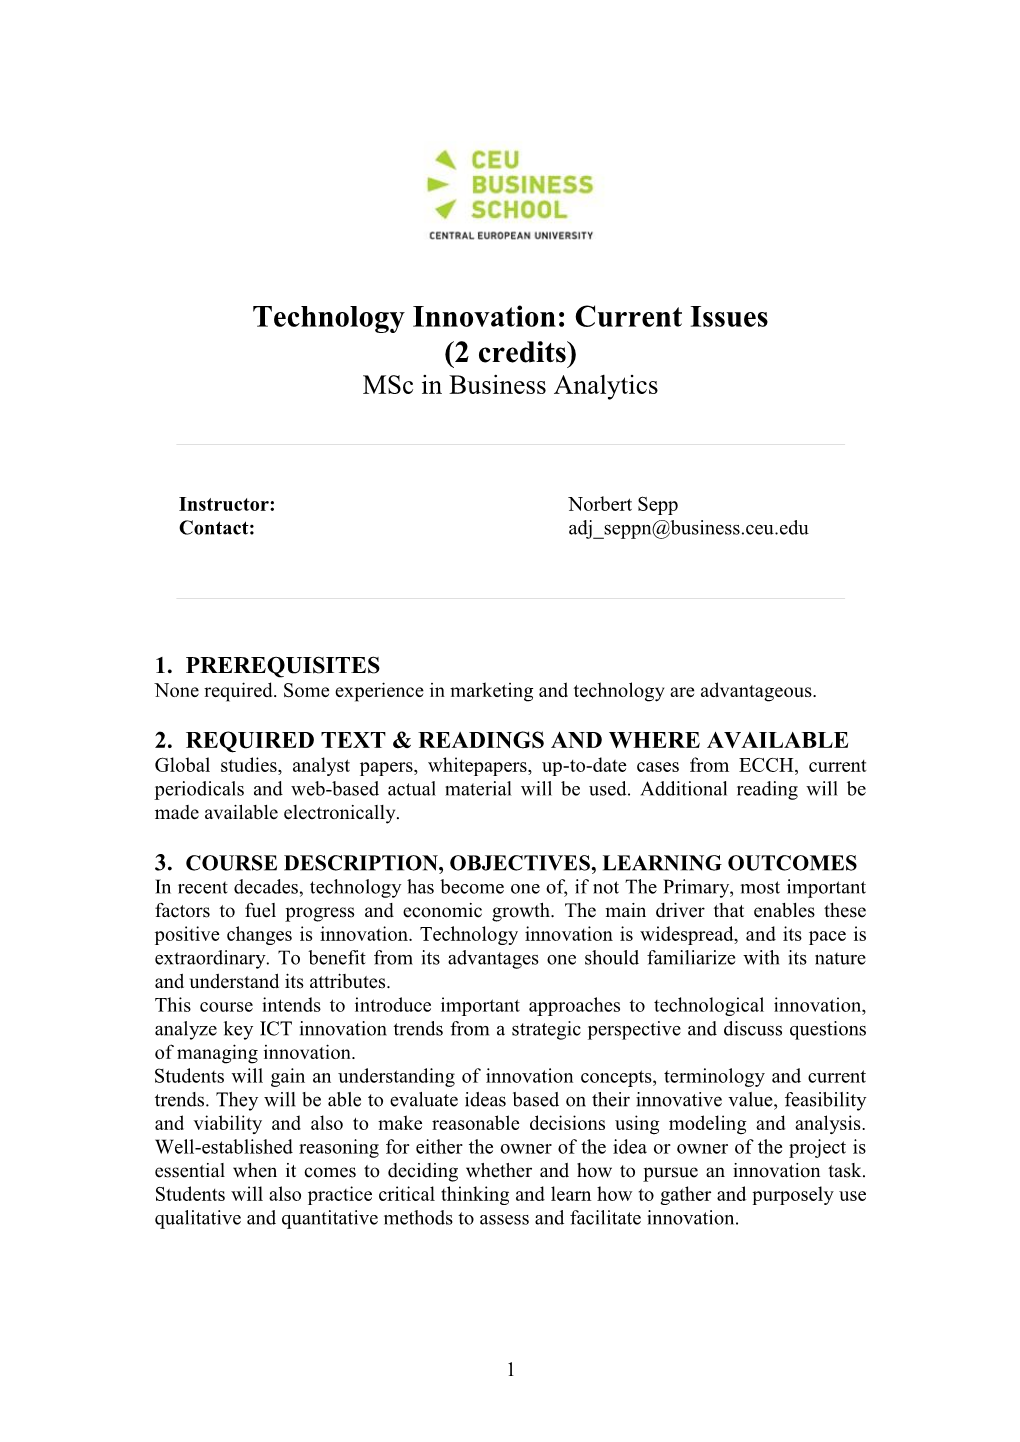 Technology Innovation: Current Issues (2 Credits) Msc in Business Analytics